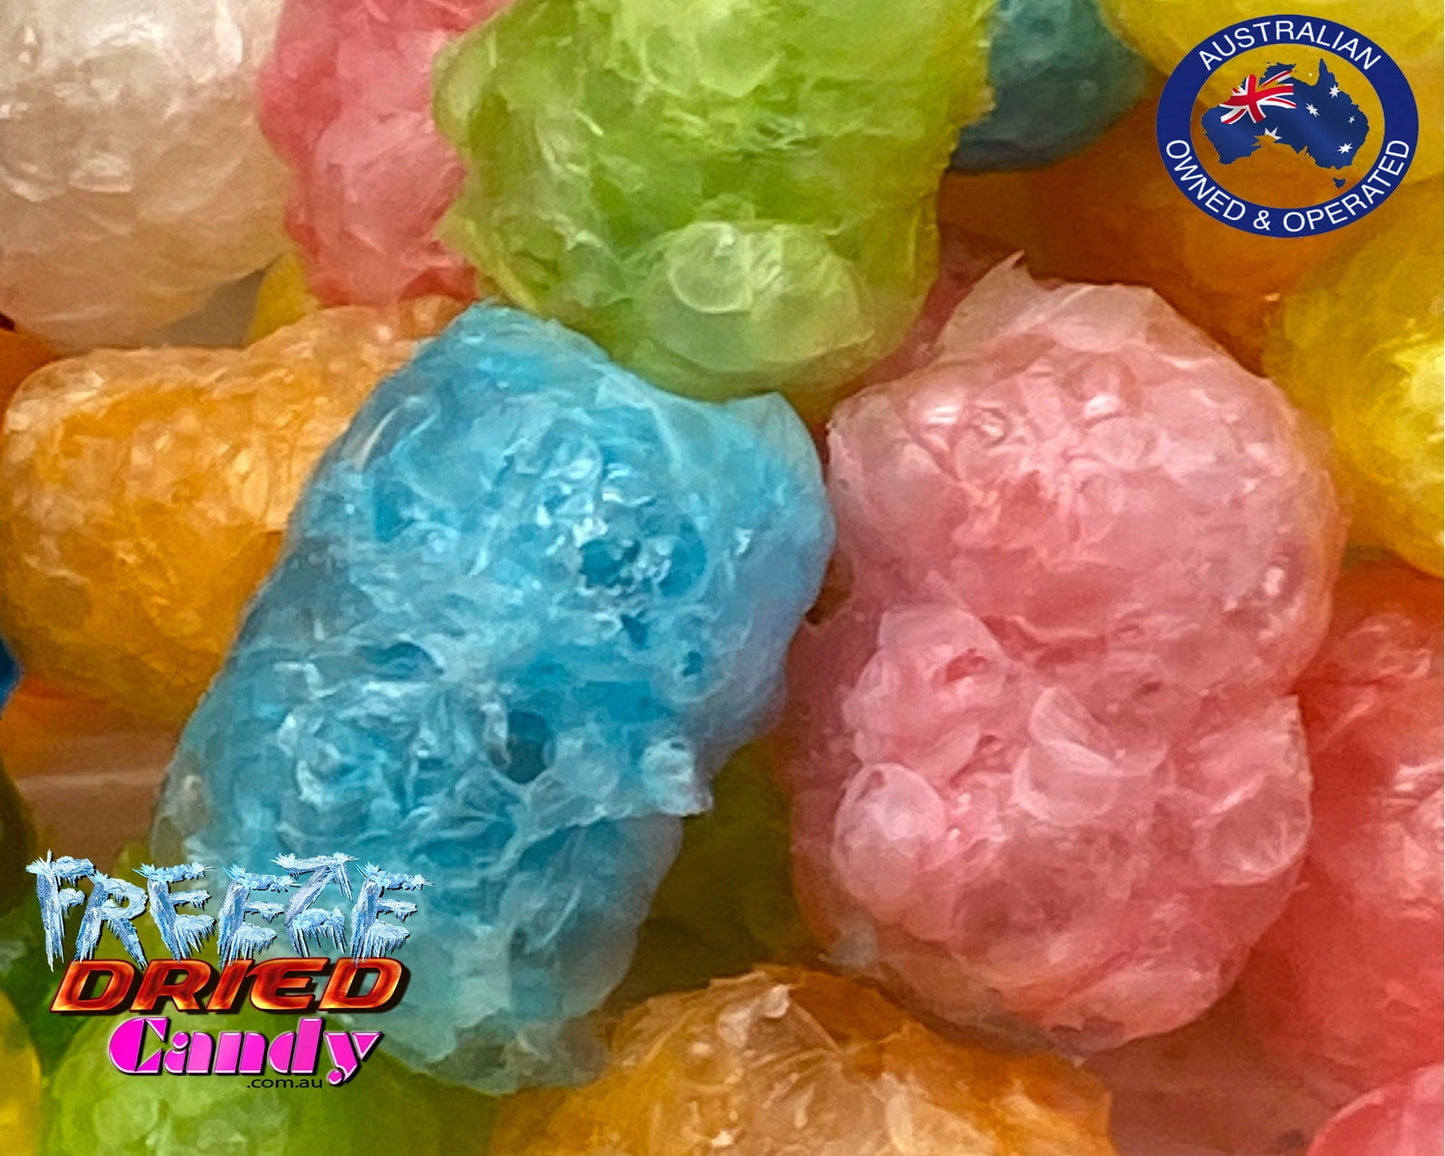  Freeze Dried Candy - Gummi Bears - Mixed Assorted Flavors Orange, Grape, Strawberry, Blue Raspberry, Cherry and Lime. An explosion of full flavor in your mouth as you bite into a Freeze Dried Candy - Gummi Bear,  No need for a handful like in its original form, one single Freeze Dried Gummi Bear will fill your mouth with flavor as it quickly melts on your tongue.  